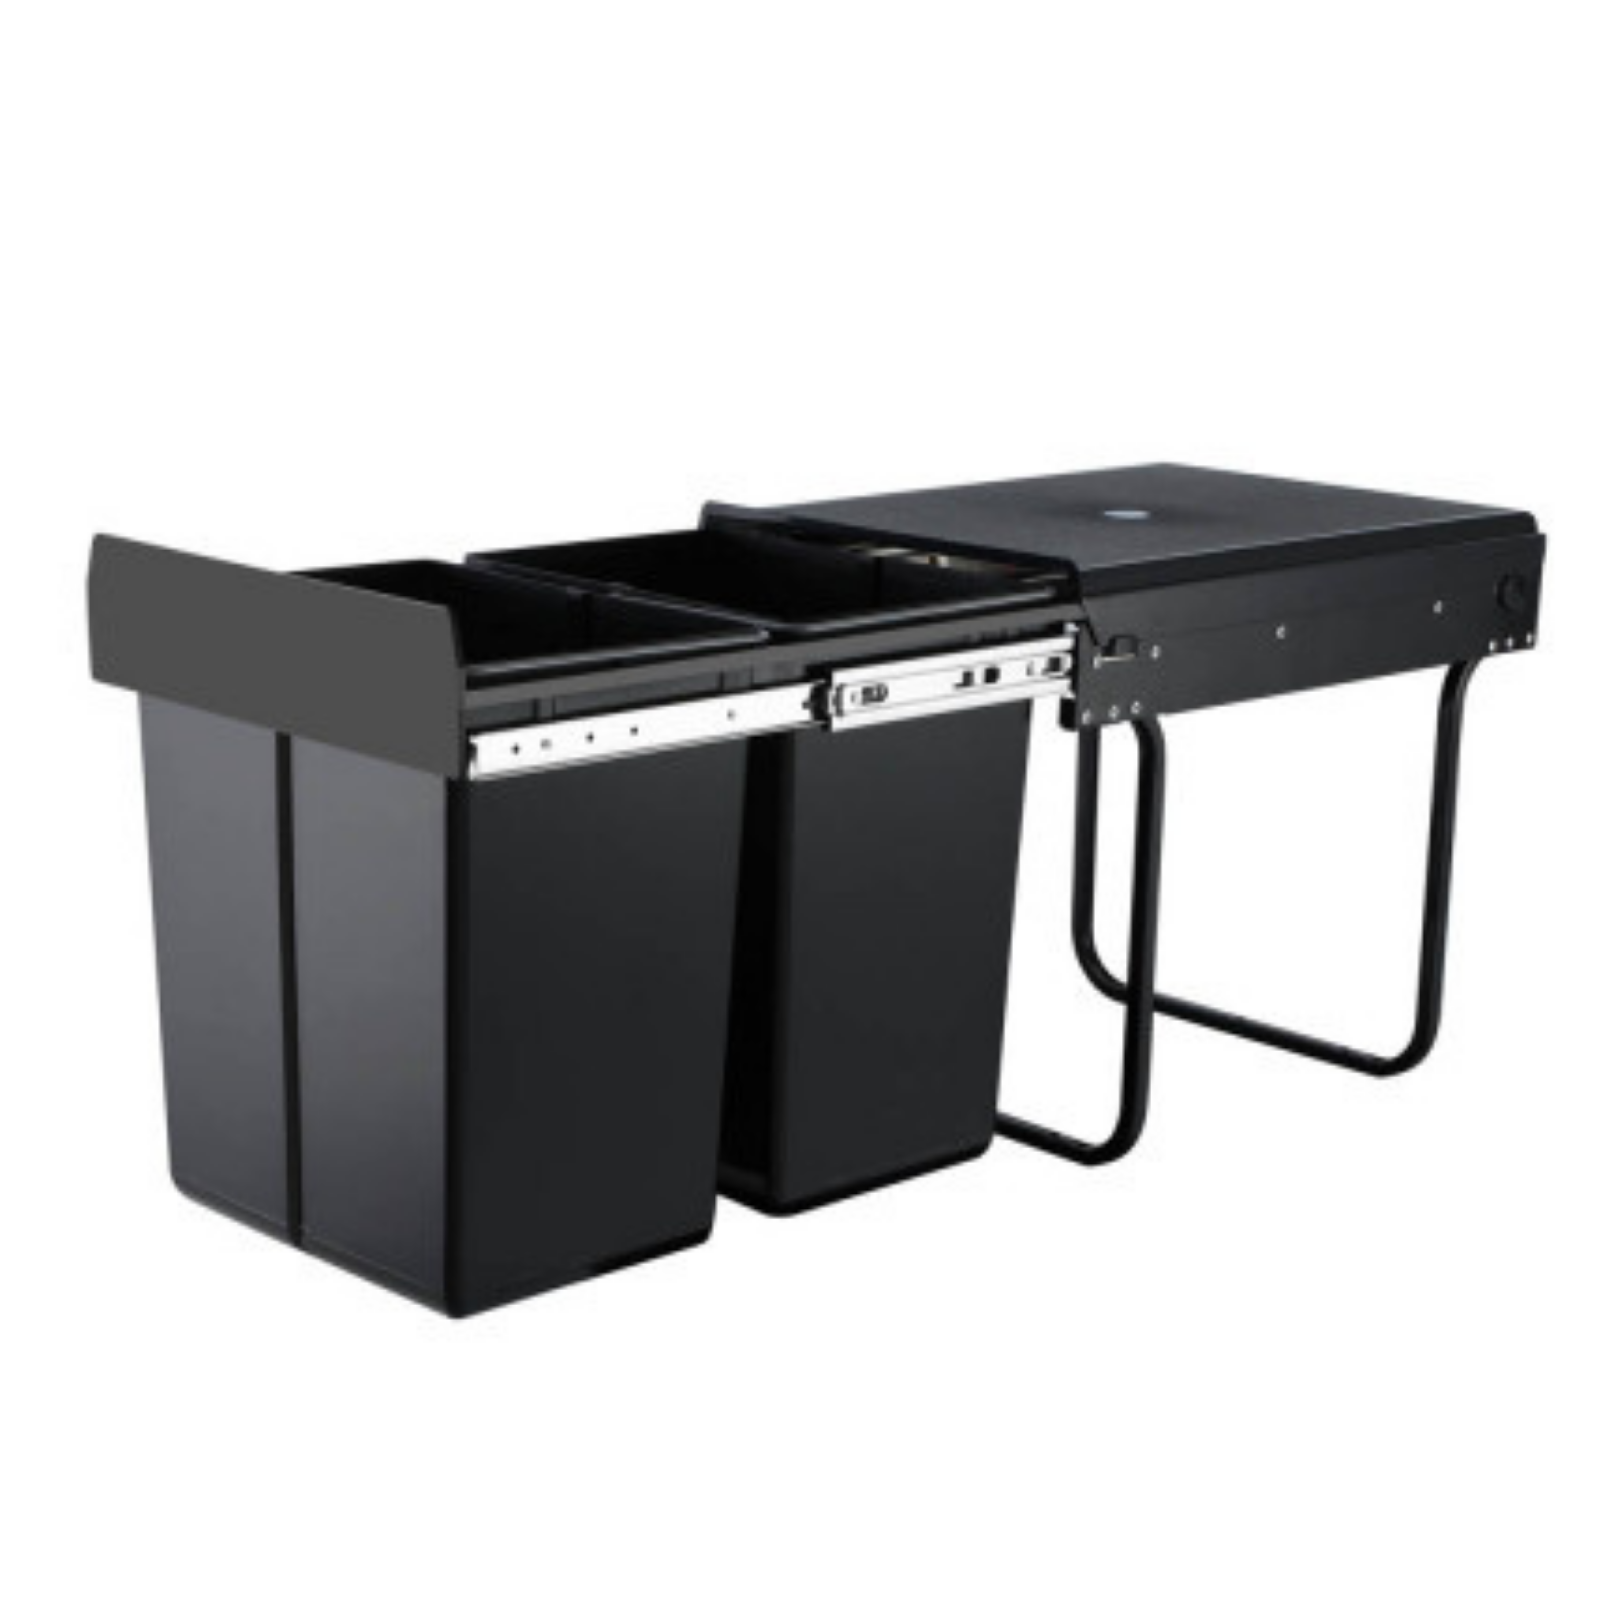 Cefito Dual Side Pull Out Bin is functional and aesthetical design